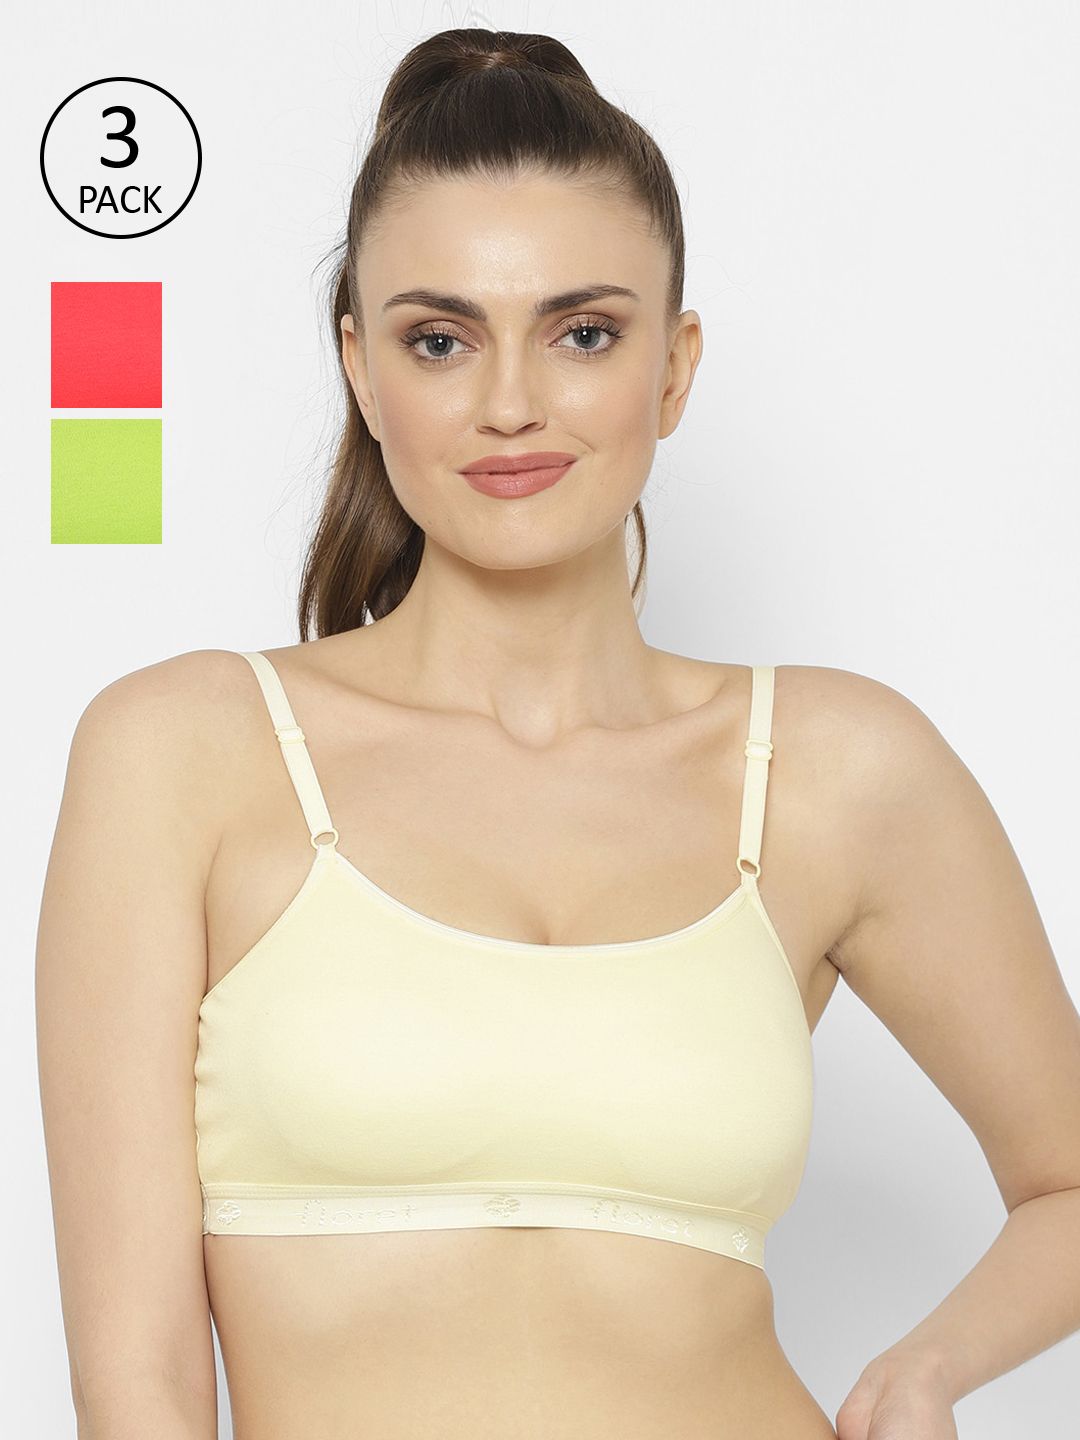 Floret Coral & Yellow Solid Set of 3 Workout Bra 1492_Tomato-Lemon-Lime Green Price in India